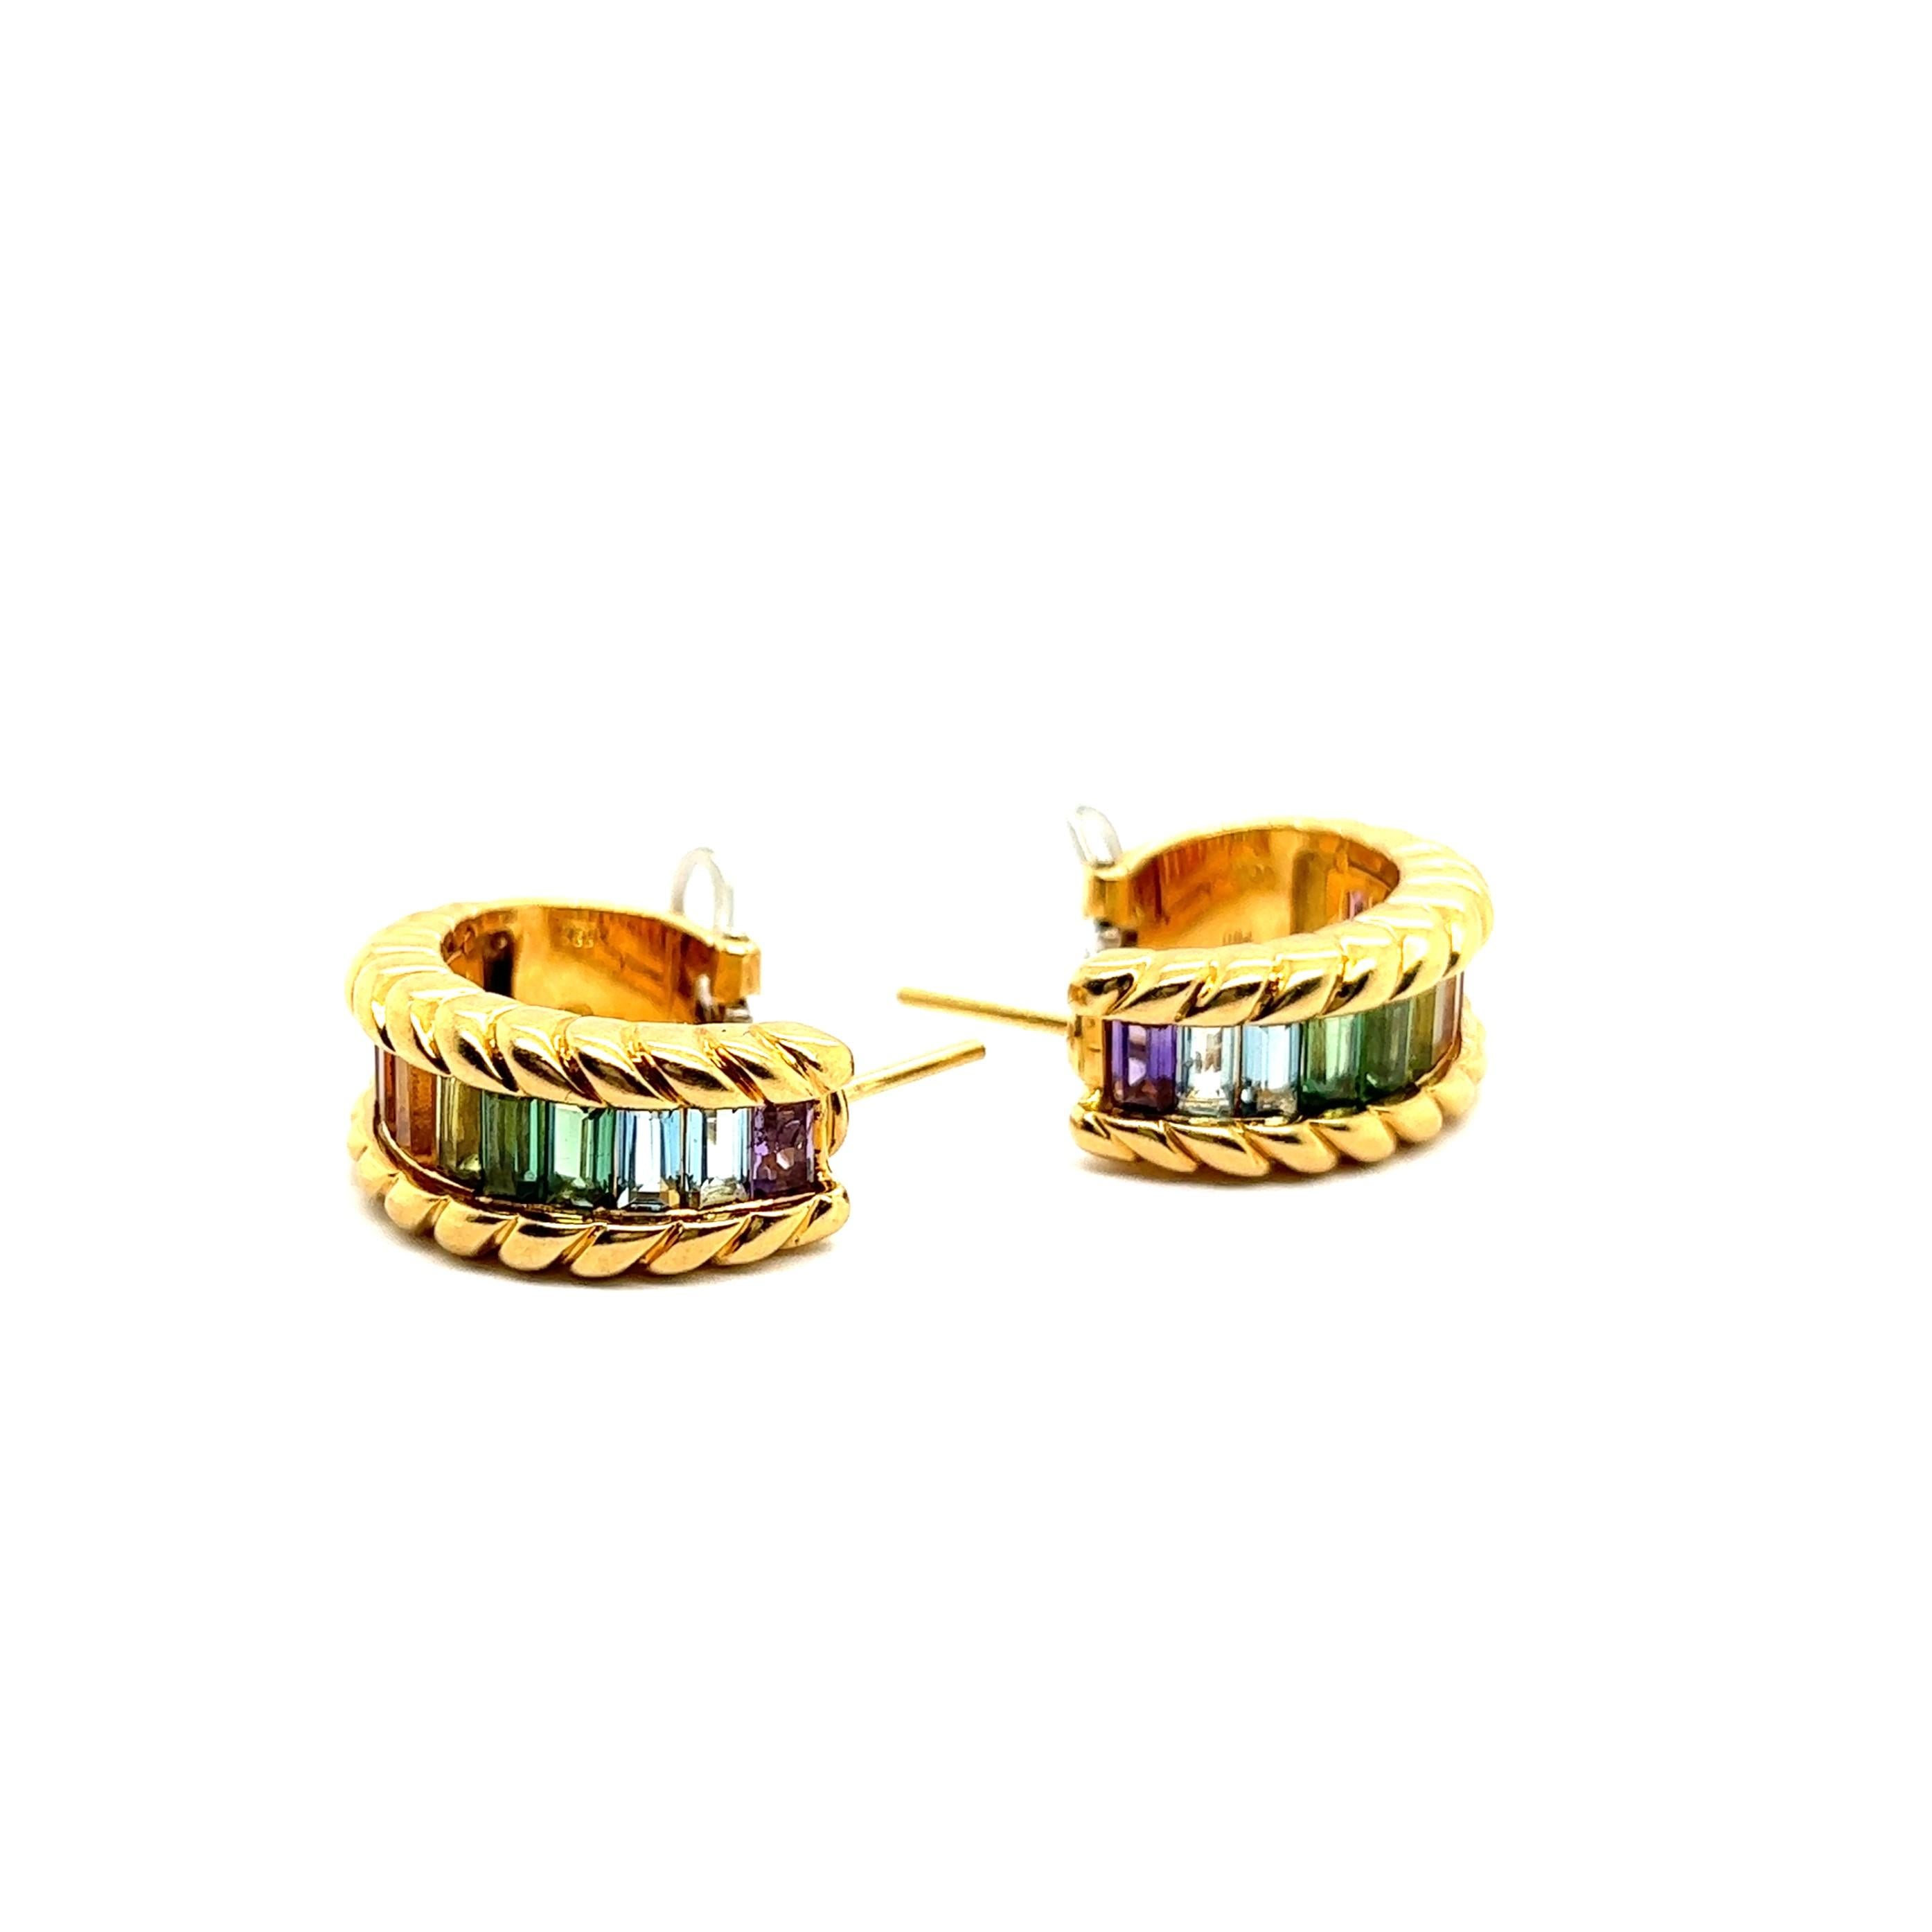 Earrings with Rainbow Gemstones in 18 Karat Yellow Gold by Gübelin In Good Condition For Sale In Lucerne, CH